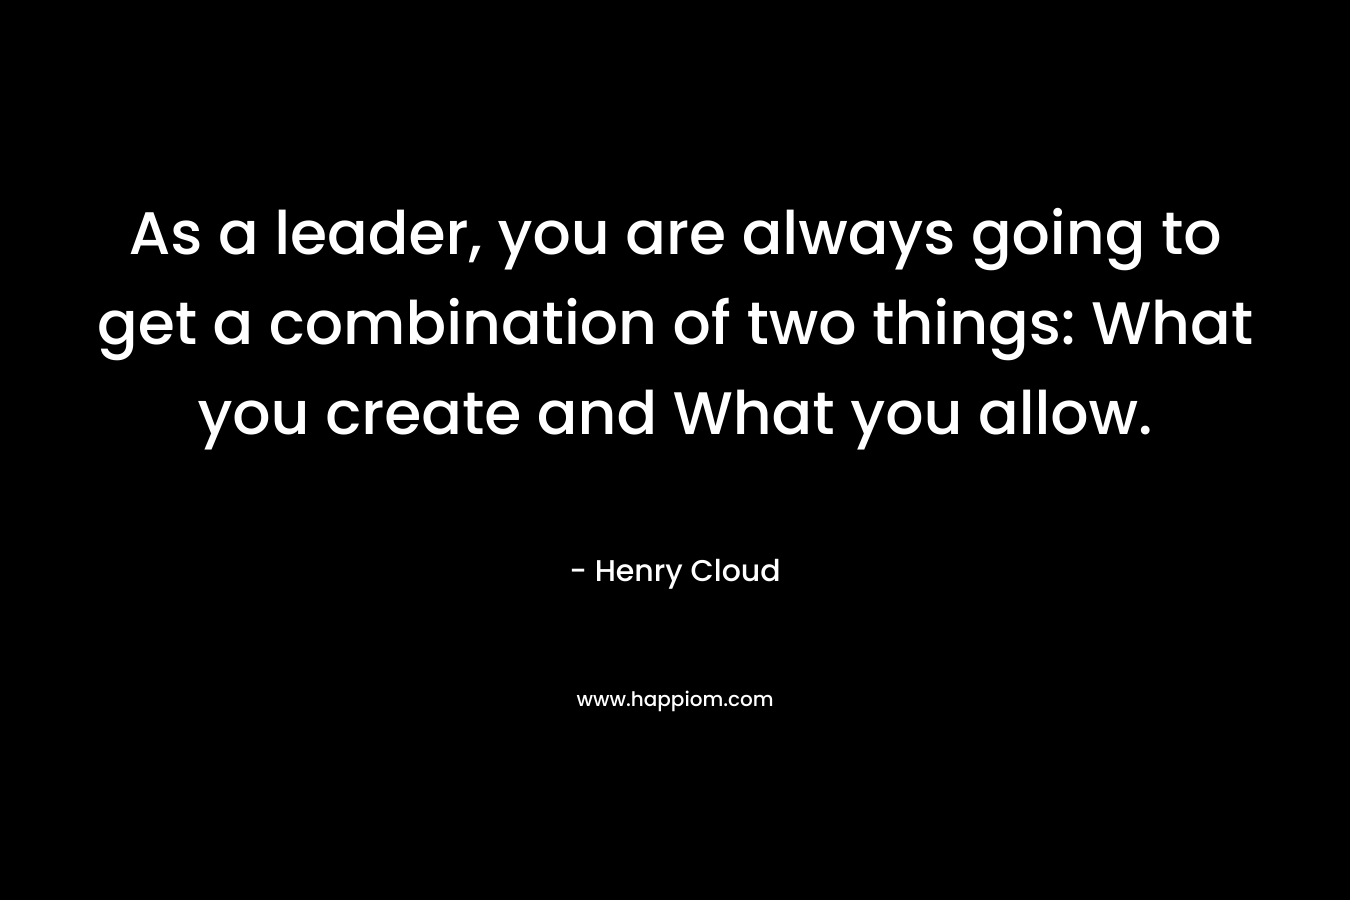 As a leader, you are always going to get a combination of two things: What you create and What you allow.